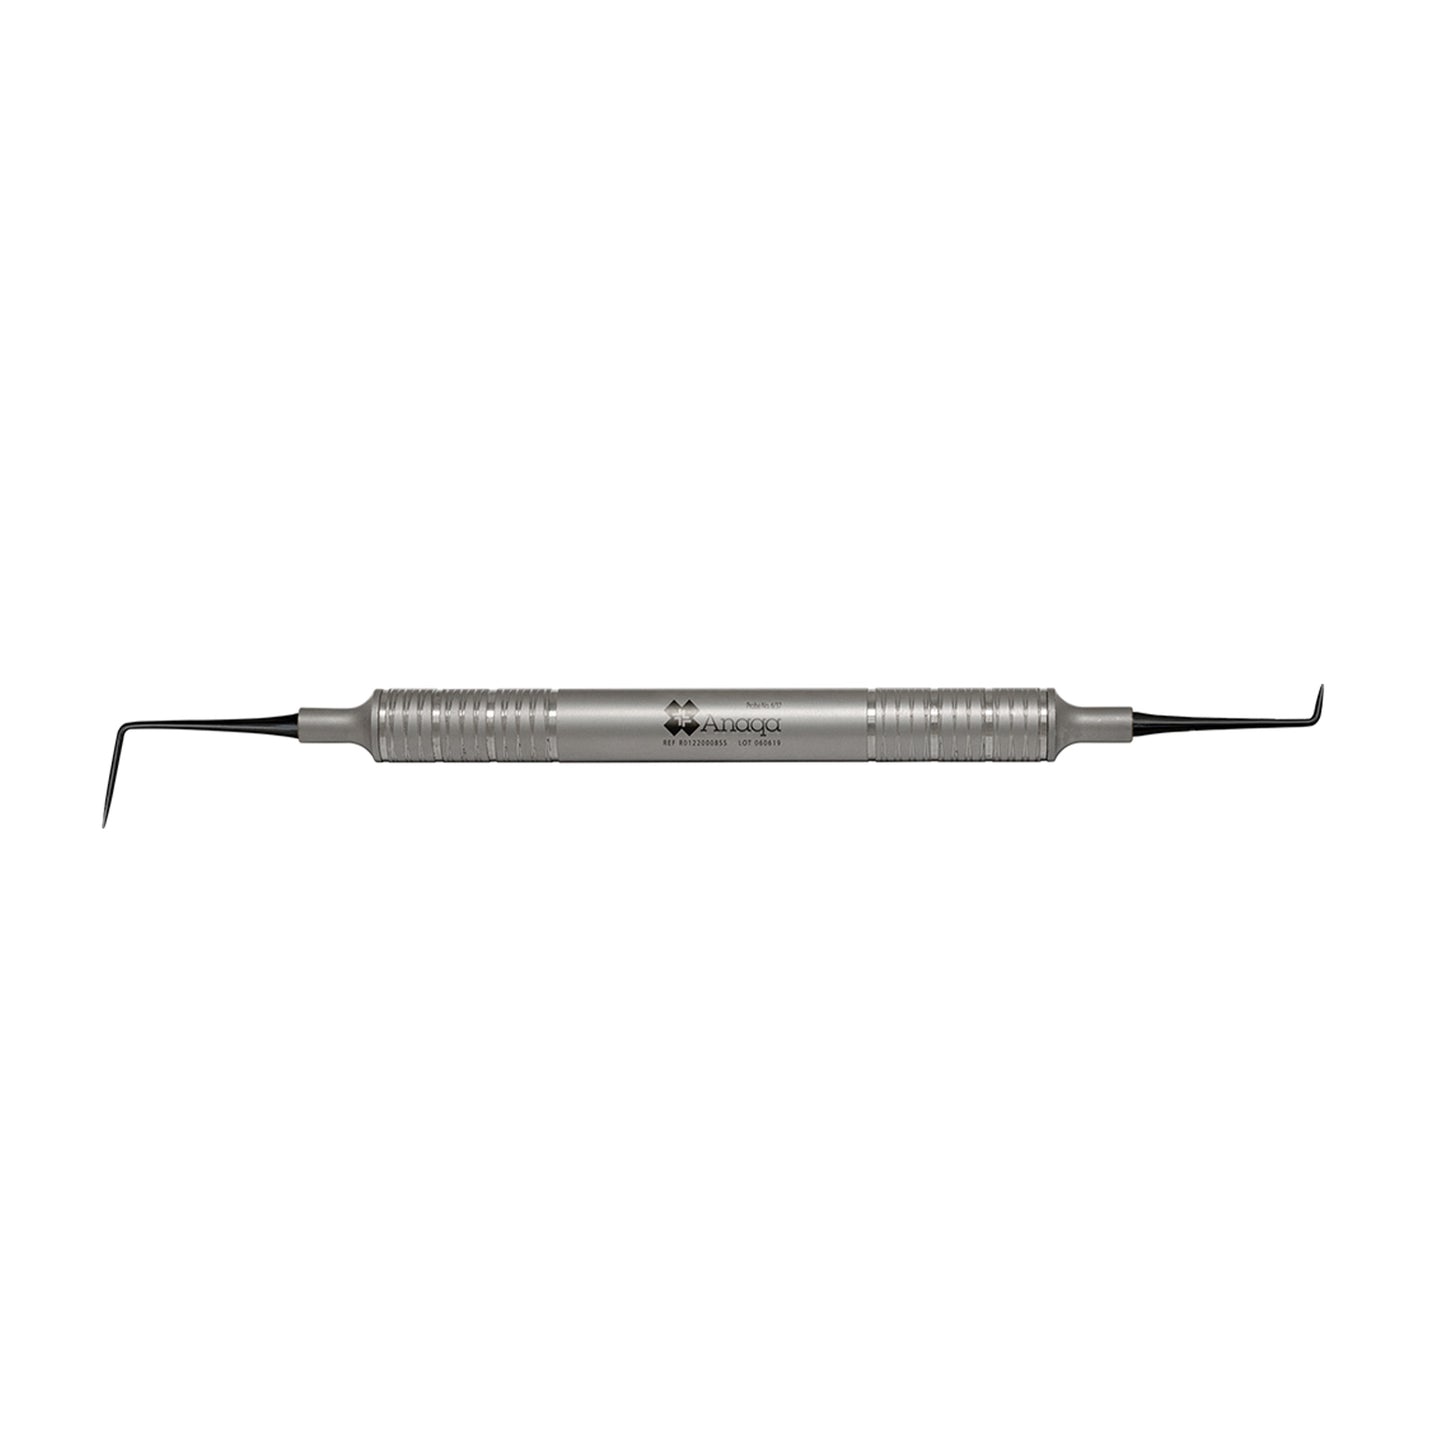 Probe No. 6/37 9.5mm handle Stainless Steel